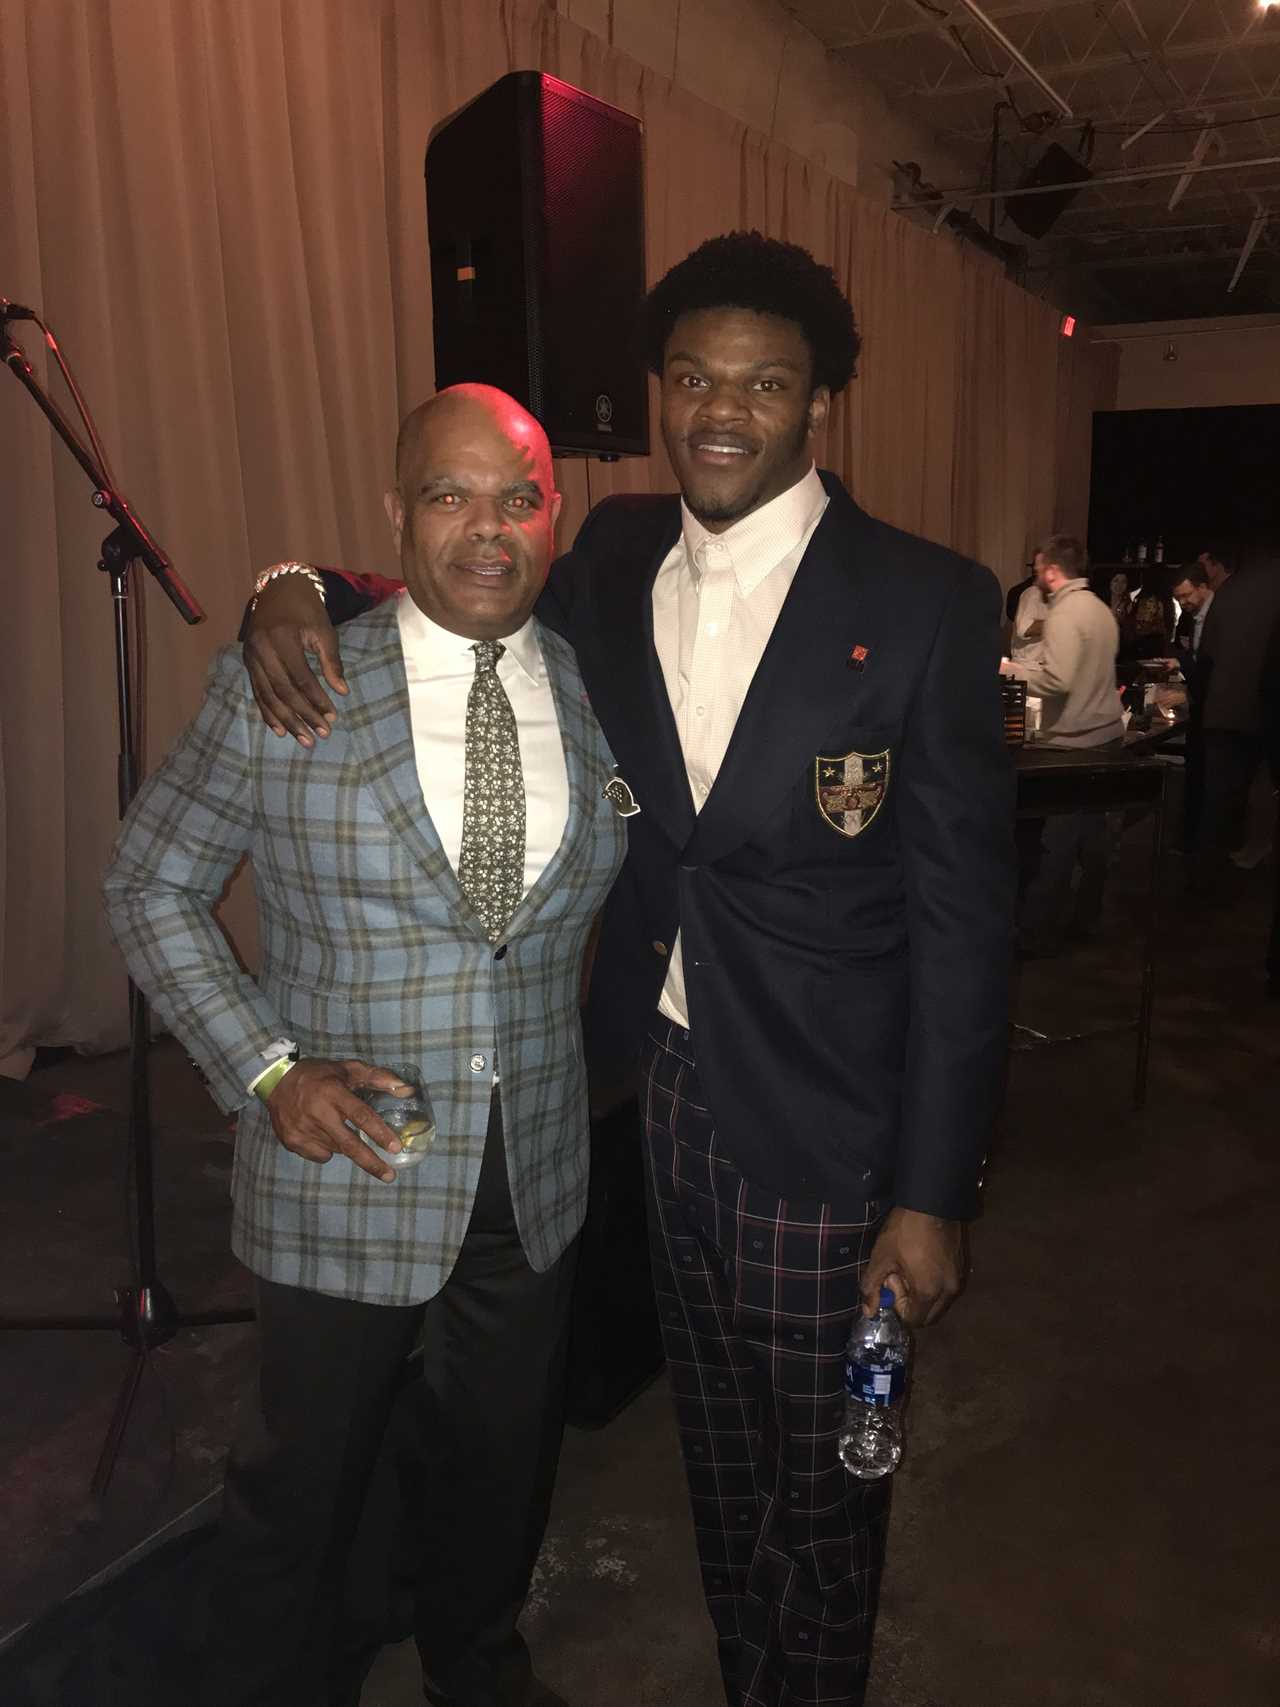 Lamar Jackson through the eyes and words of Baltimore Ravens fans Six Ravens supporters share their thoughts on the quarterback’s connection to the community, his contract situation, his chances of winning a Super Bowl and more